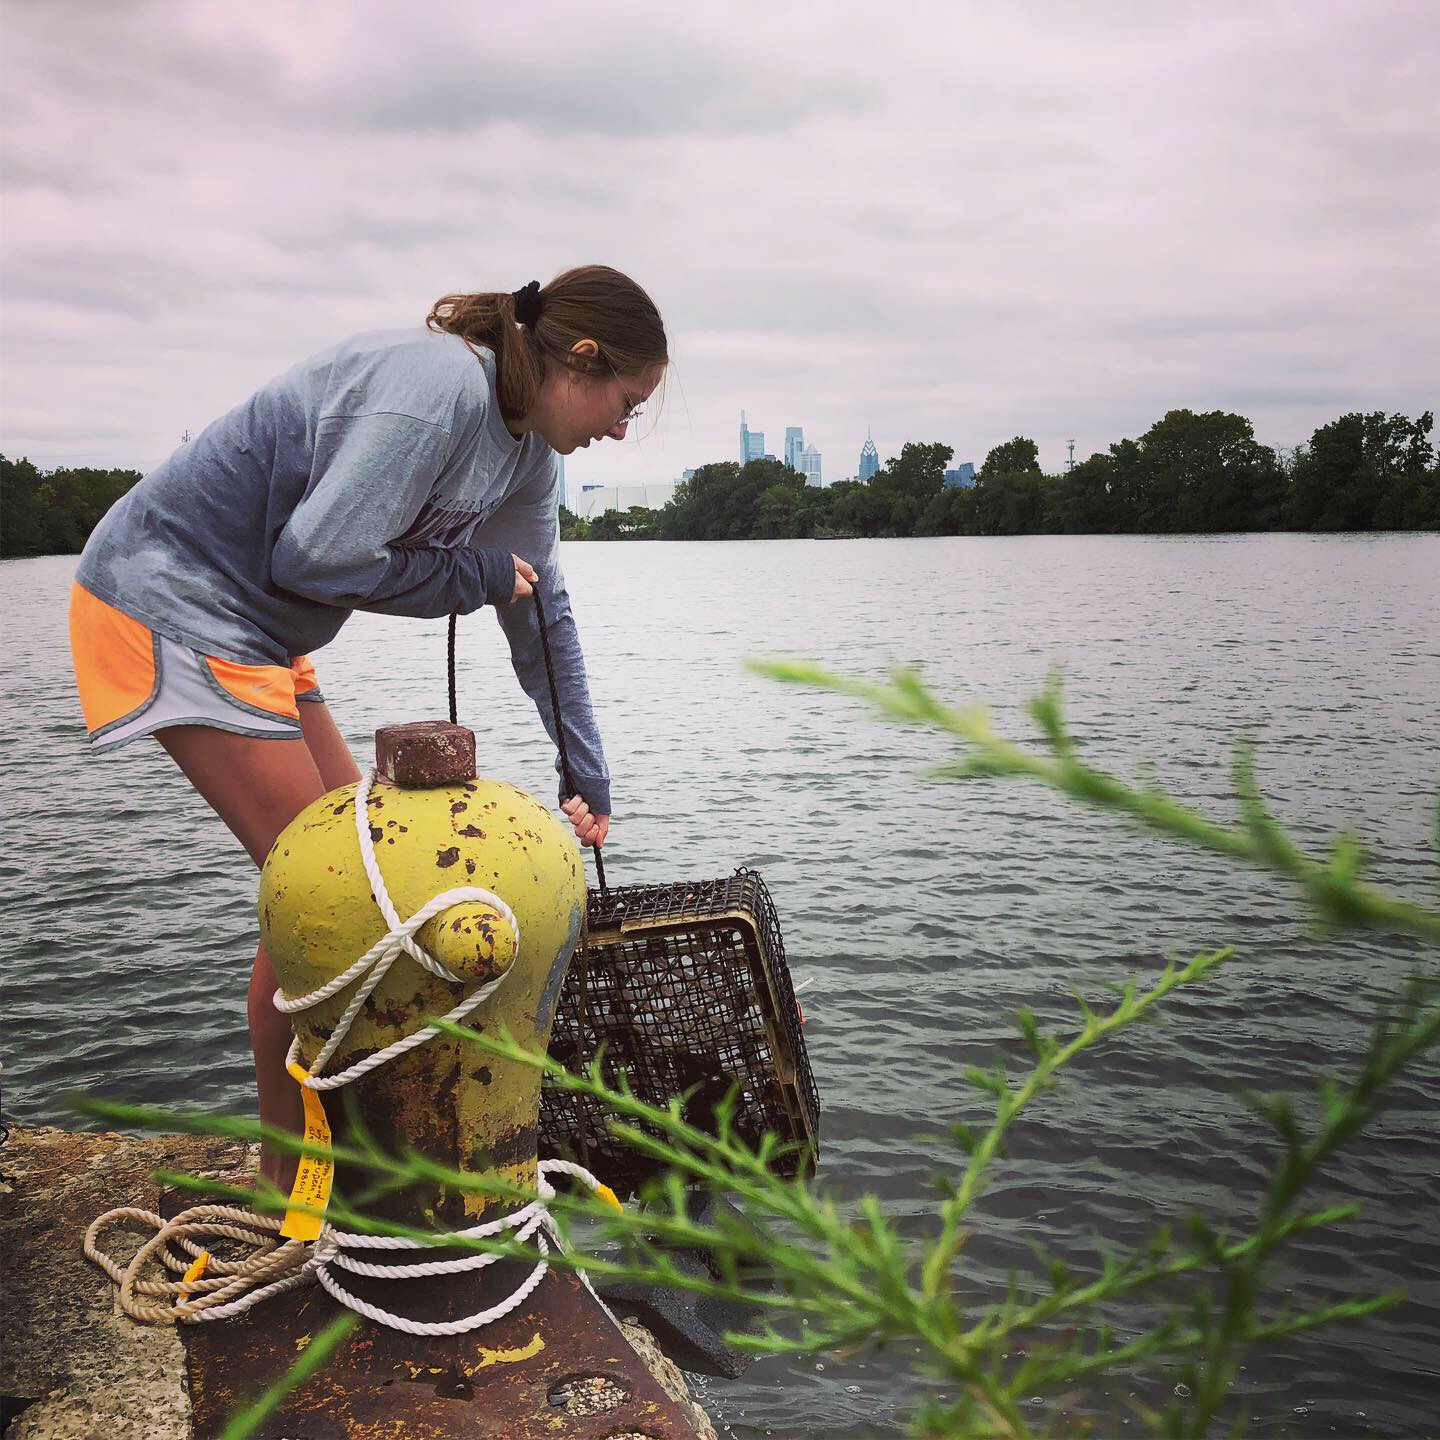  Penn Biology student, Izzy Viney, retrieves mussels from the Schuylkill River at our Bartram’s Garden research and community outreach site on S. 56th street.